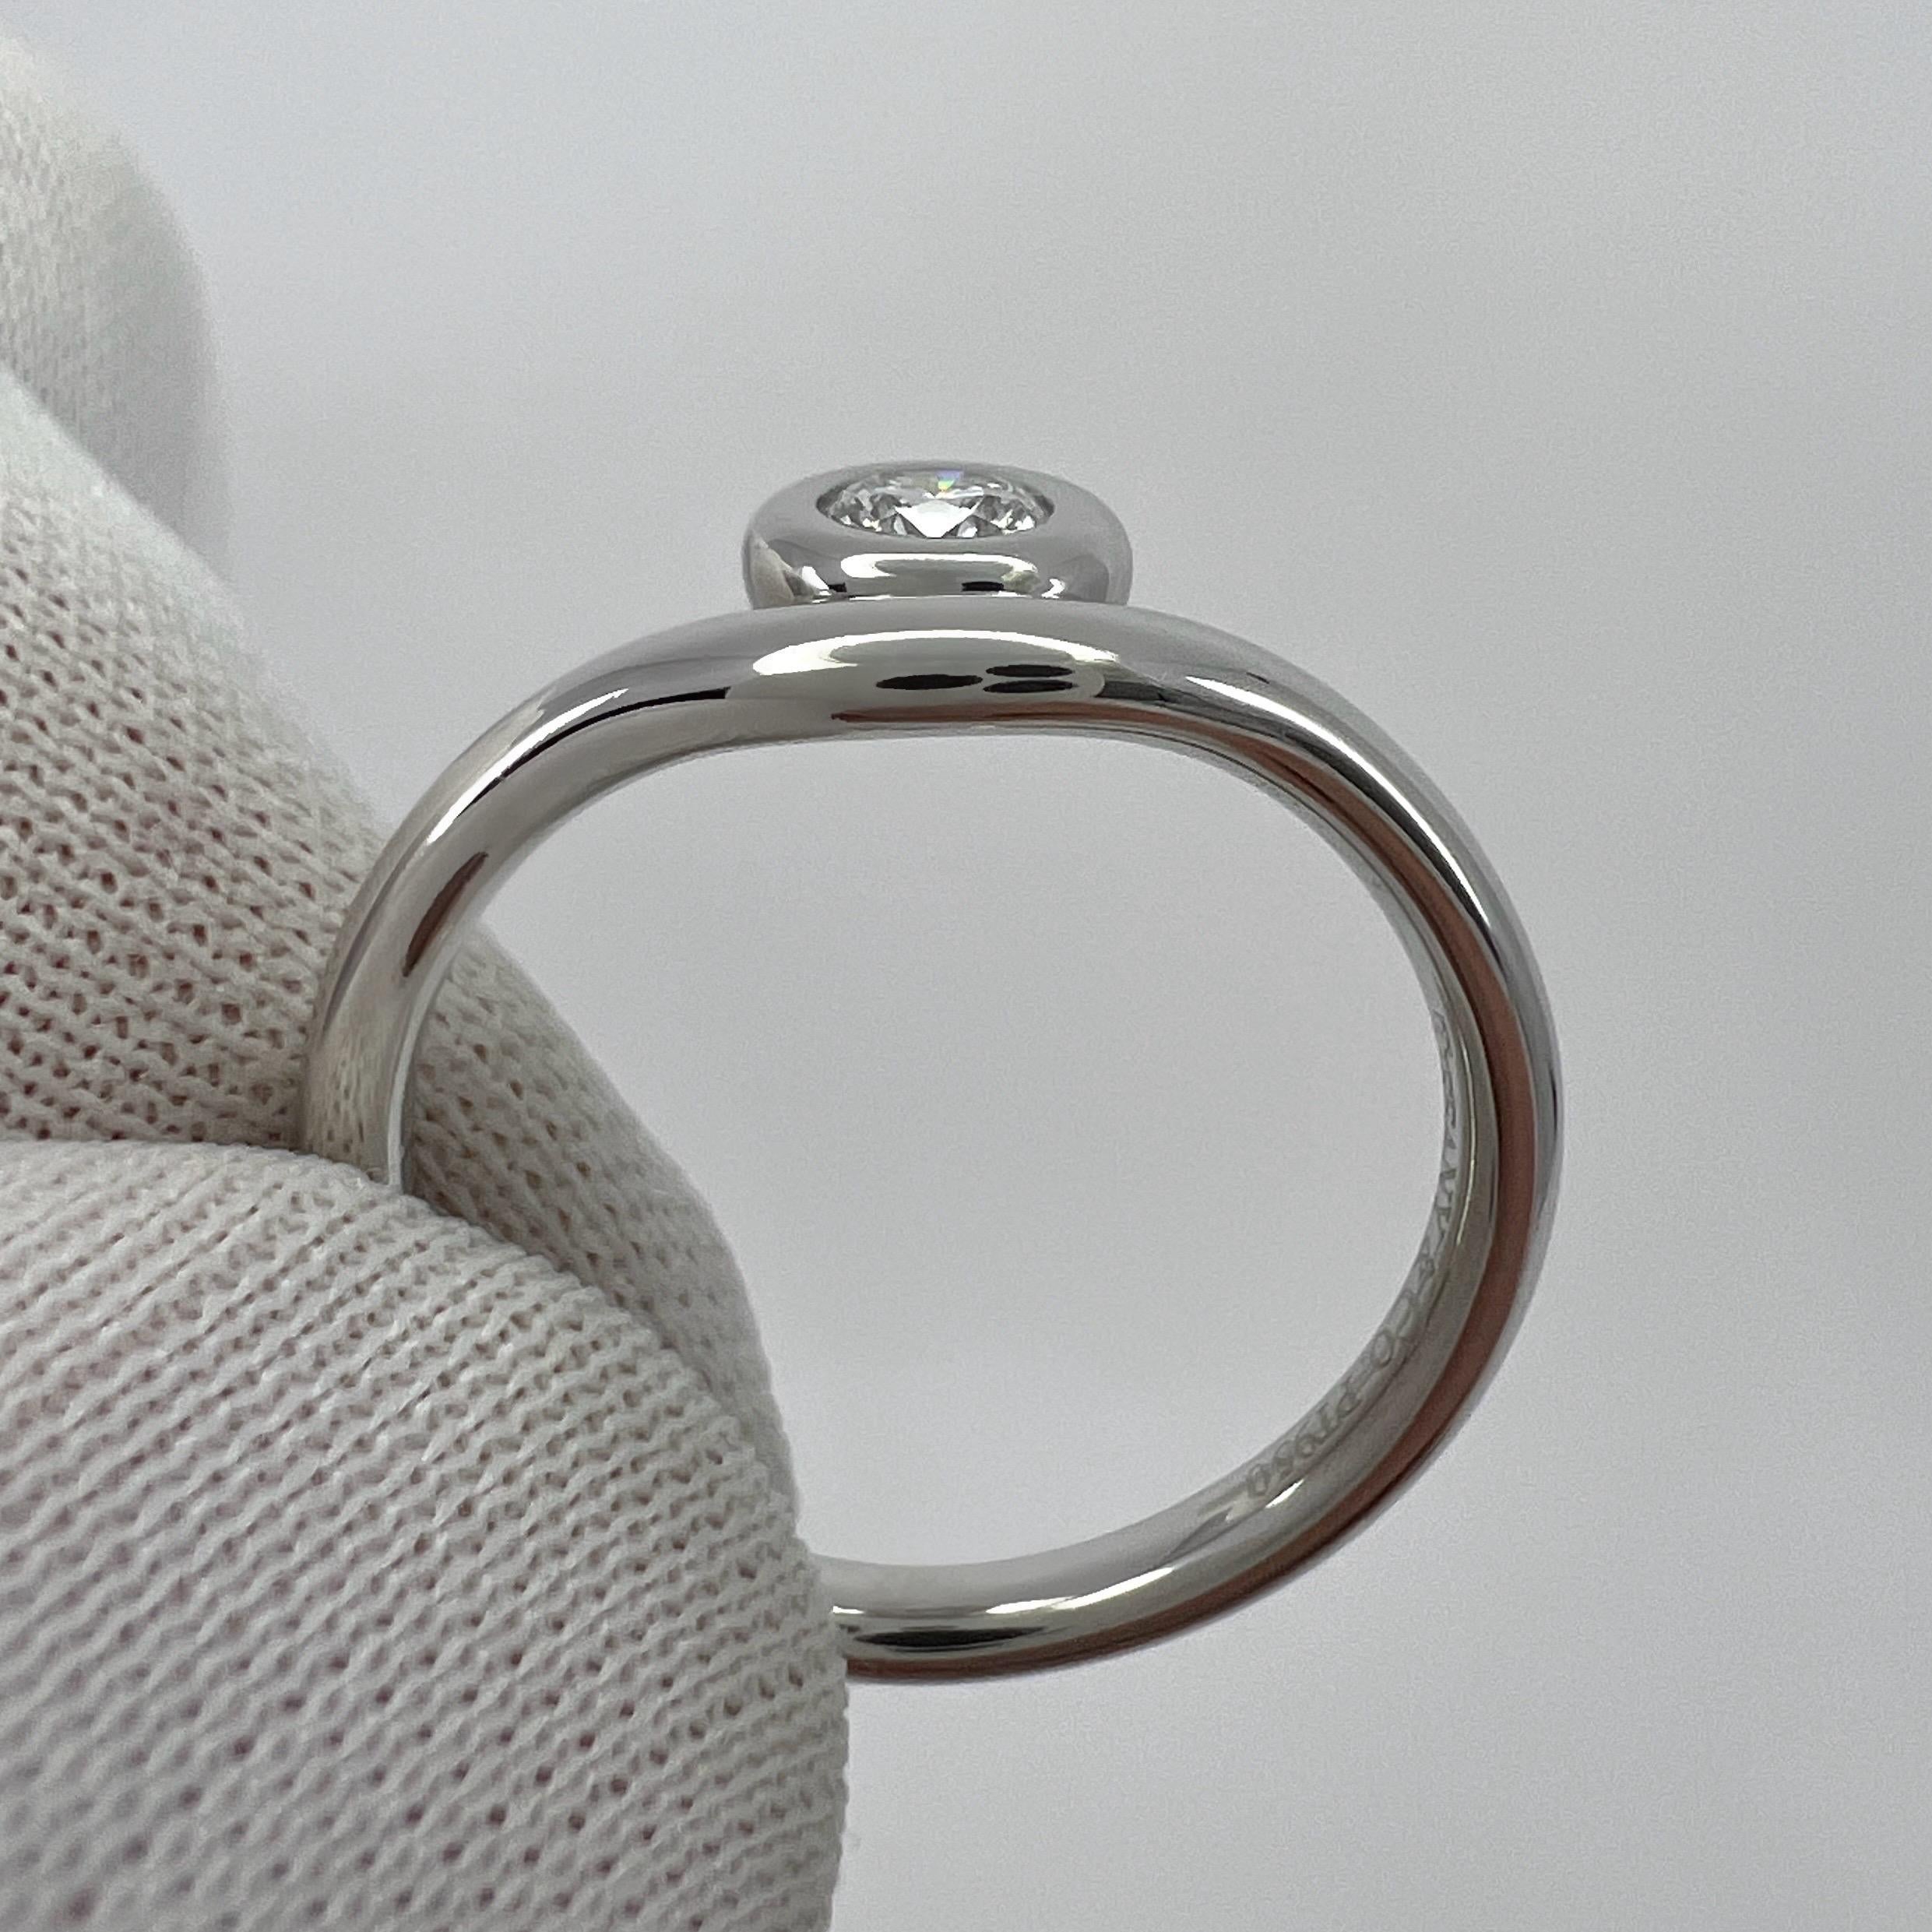 Vintage Tiffany & Co. Round Cut Diamond By The Yard 950 Platinum Solitaire Ring For Sale 3